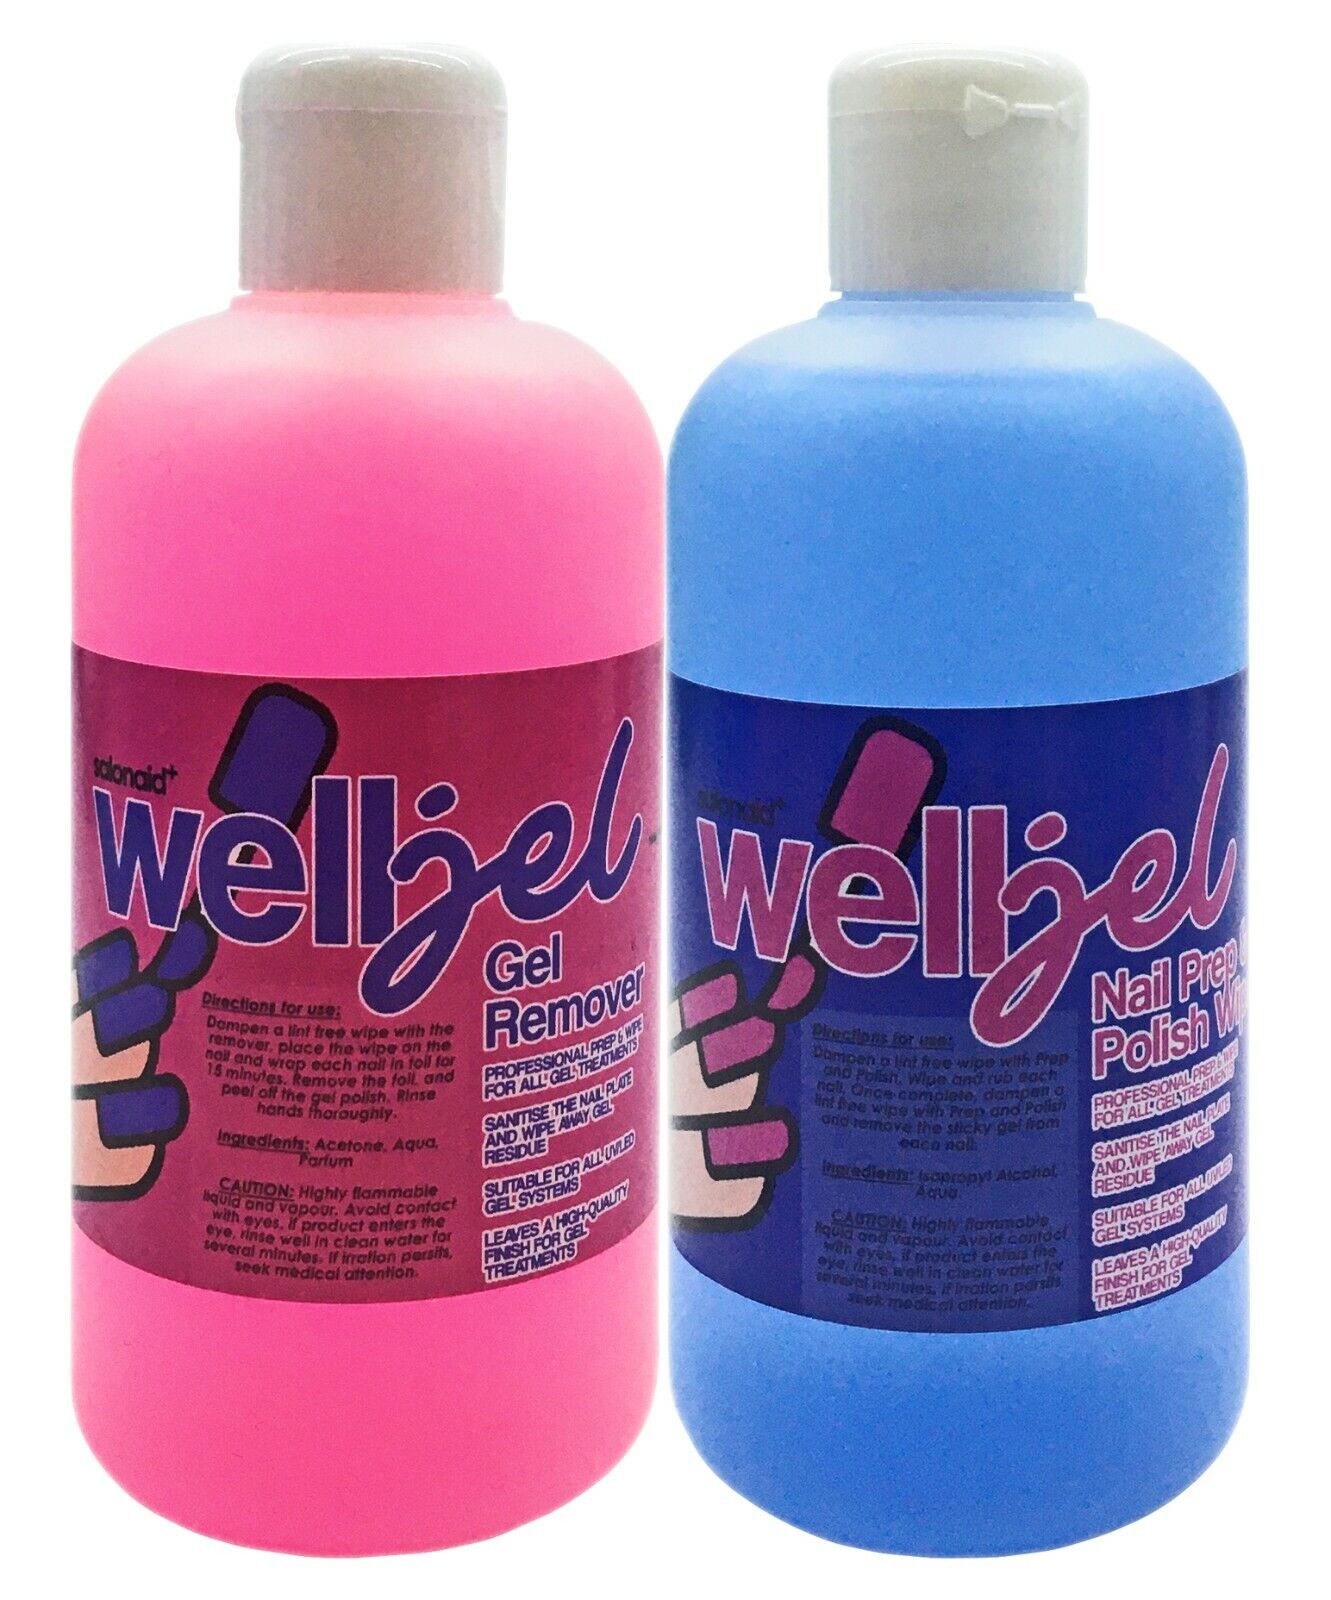 Acetone Nail Polish Remover And Prep Well Jel Twin Pack 250ml Bottles | eBay